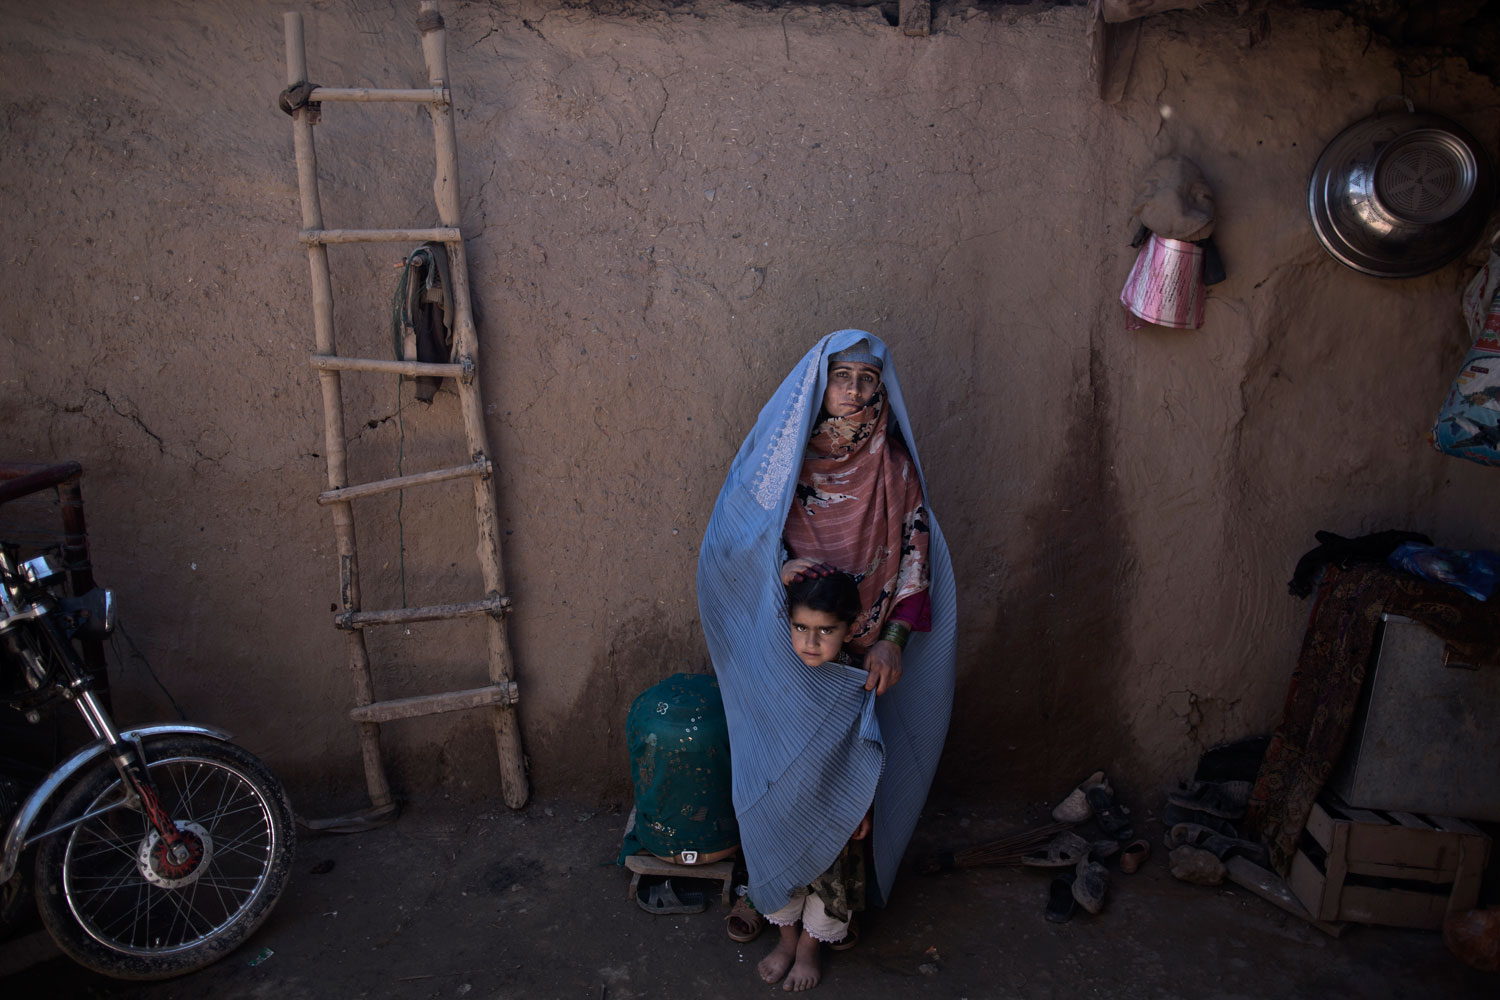 Afghan refugee Aziza Nazar, 37, a mother of 7 children, with her daughter Lal Mina, 3, at her neighbor's mud house in a slum on the outskirts of Islamabad on March 30, 2014. Nazar and her parents fled the Civil War in their village near Kabul 15 years ago.
                              
                               During the the Civil War only rich people could survive. There was fighting between groups in my village. That's why my parents decided to flee to Pakistan. I don't want my children to live [through] what I lived [through], and I can make sure of that in Pakistan.